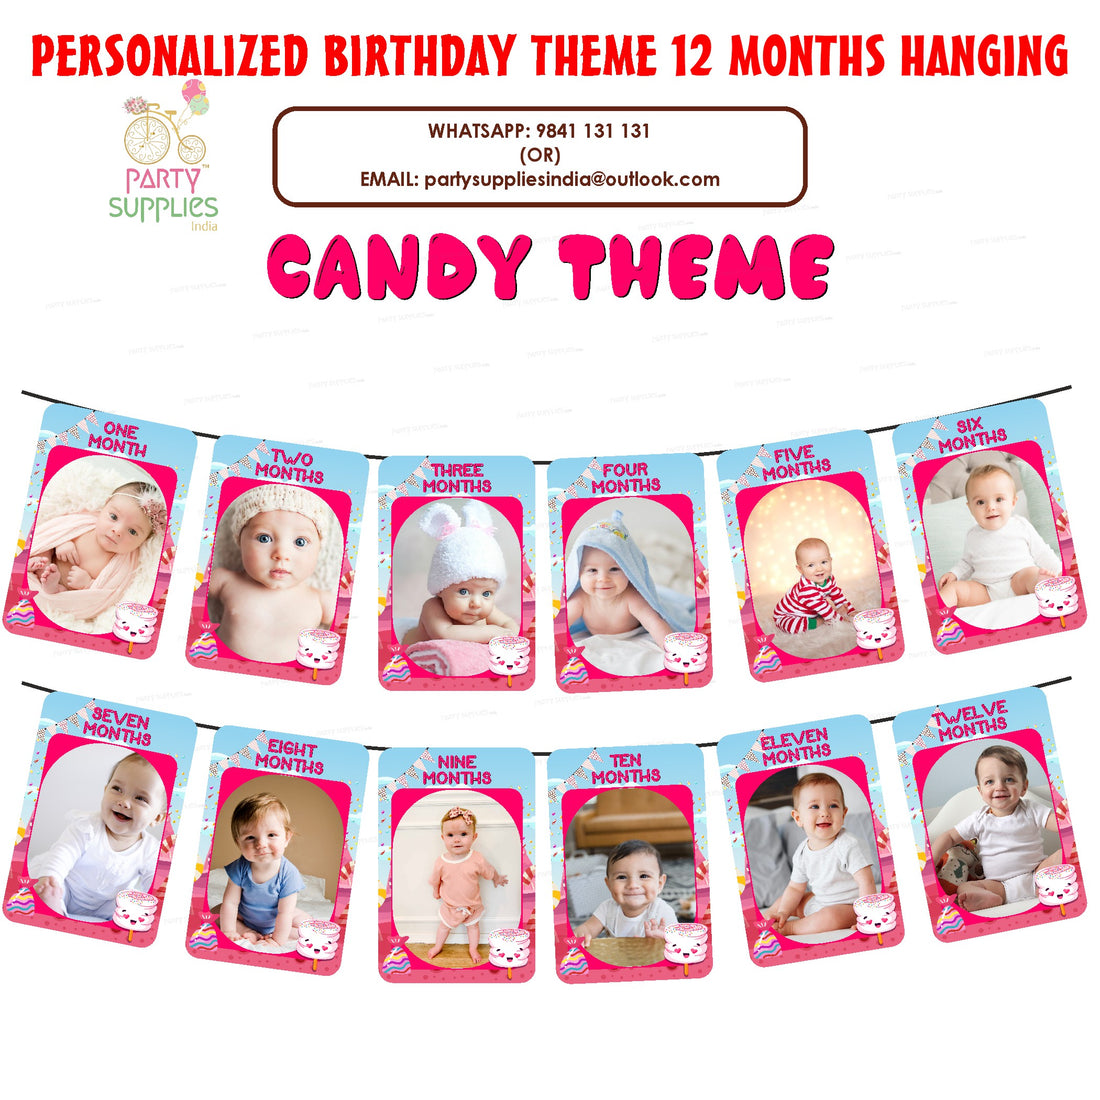 PSI Candy Theme 12 Months Photo Banner